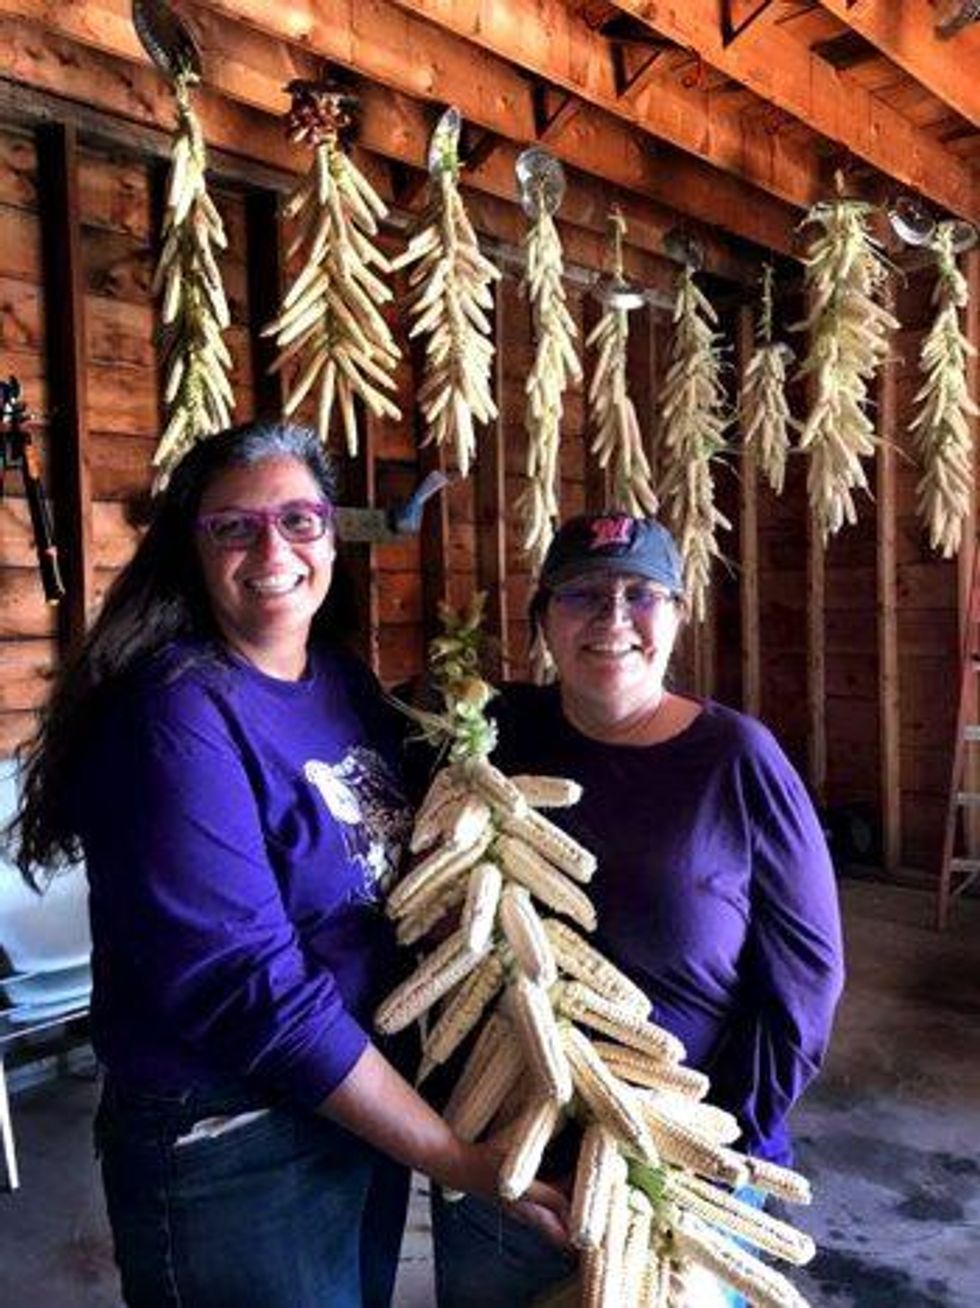 Laura Manthe and Michelle Webster, members of the Ohe*laku farming cooperative, which grows indigenous white corn on the Oneida Nation's Wisconsin reservation, display a corn braid. (Photo: Lea Zeise)